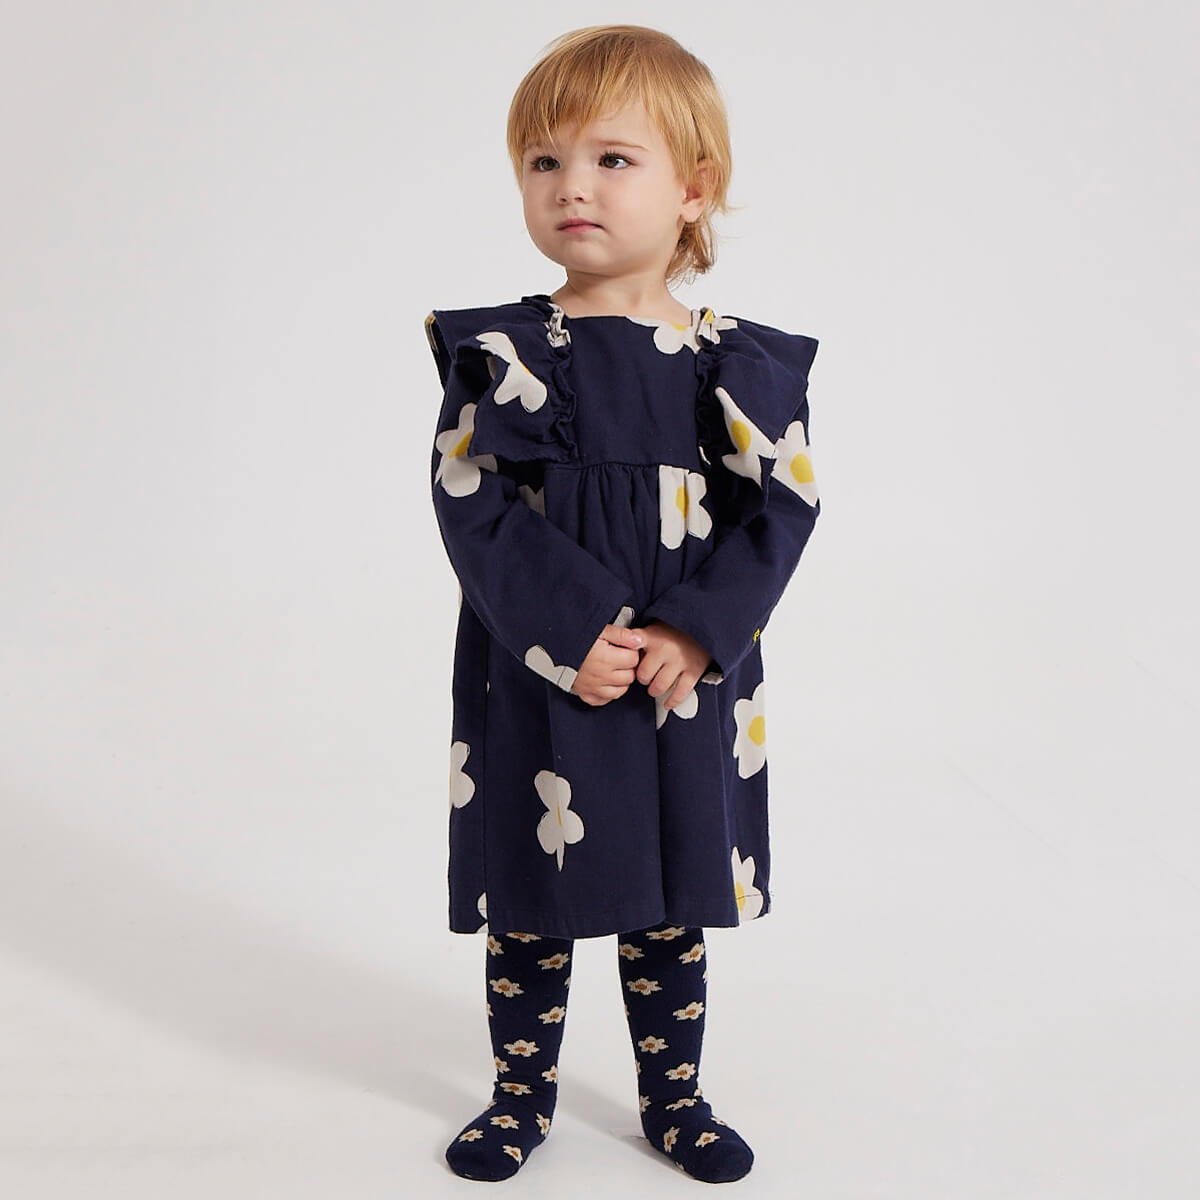 Big Flower All Over Ruffle Woven Baby Dress by Bobo Choses